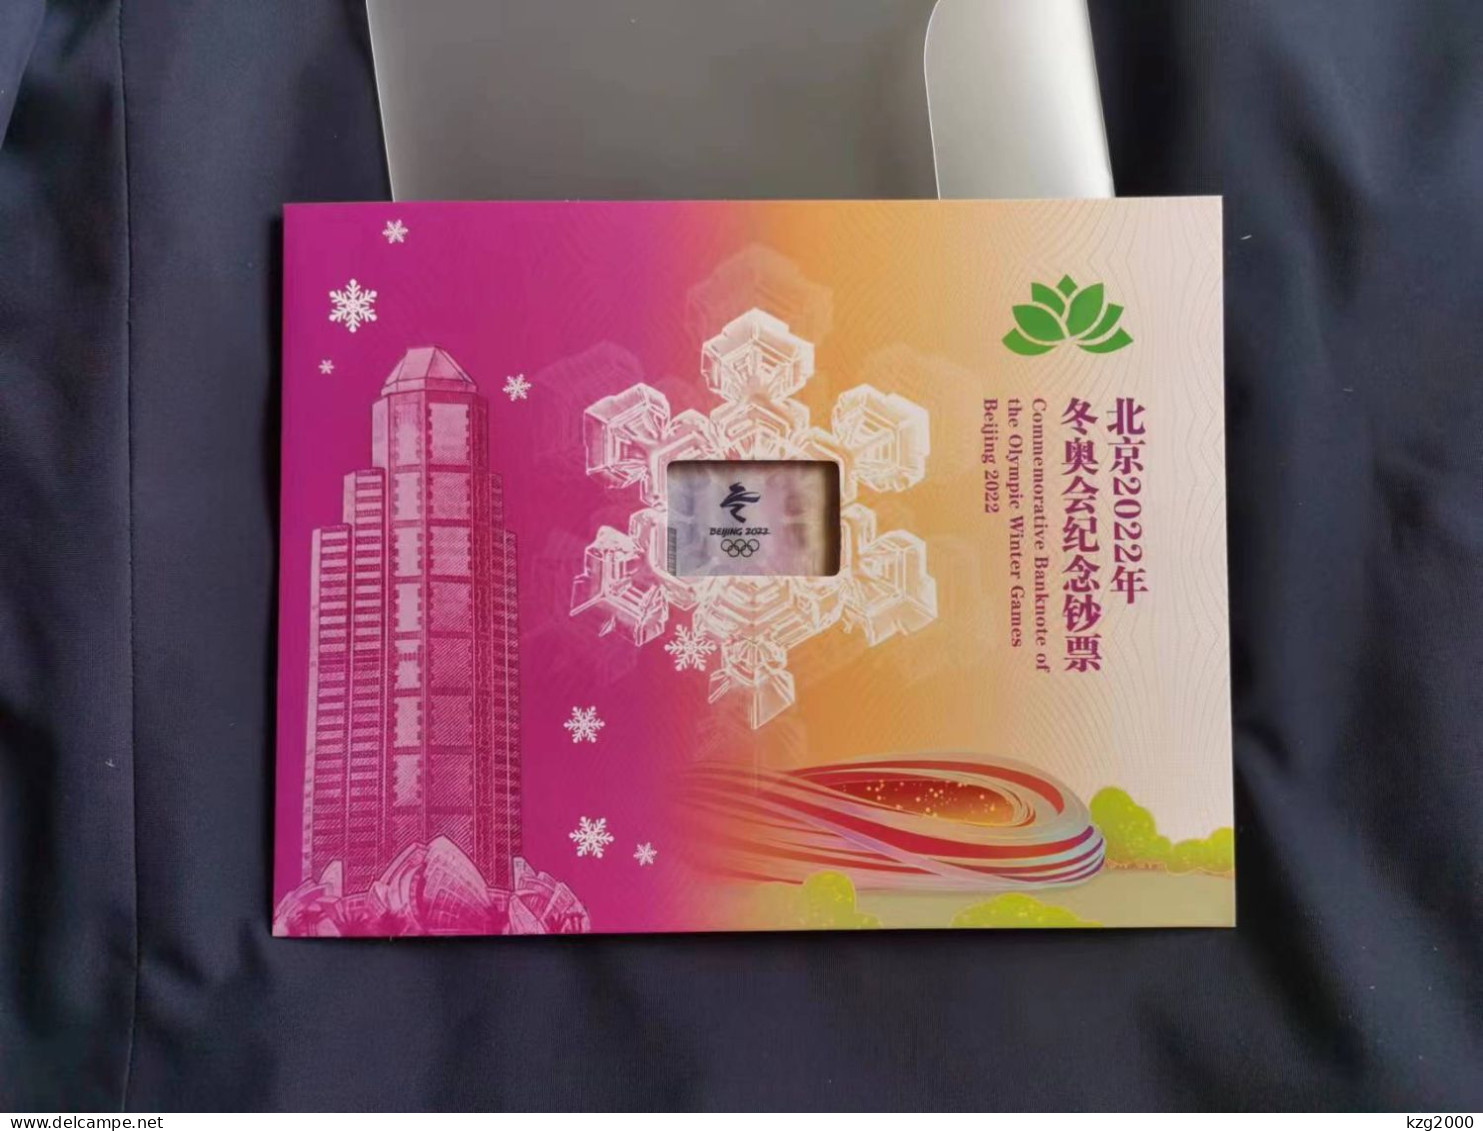 Macau  Macao 2022 Beijing Winter Games Olympics Paper Money Banknotes 20 Yuan  Polymer & Paper  Banknote  With Box - Cina